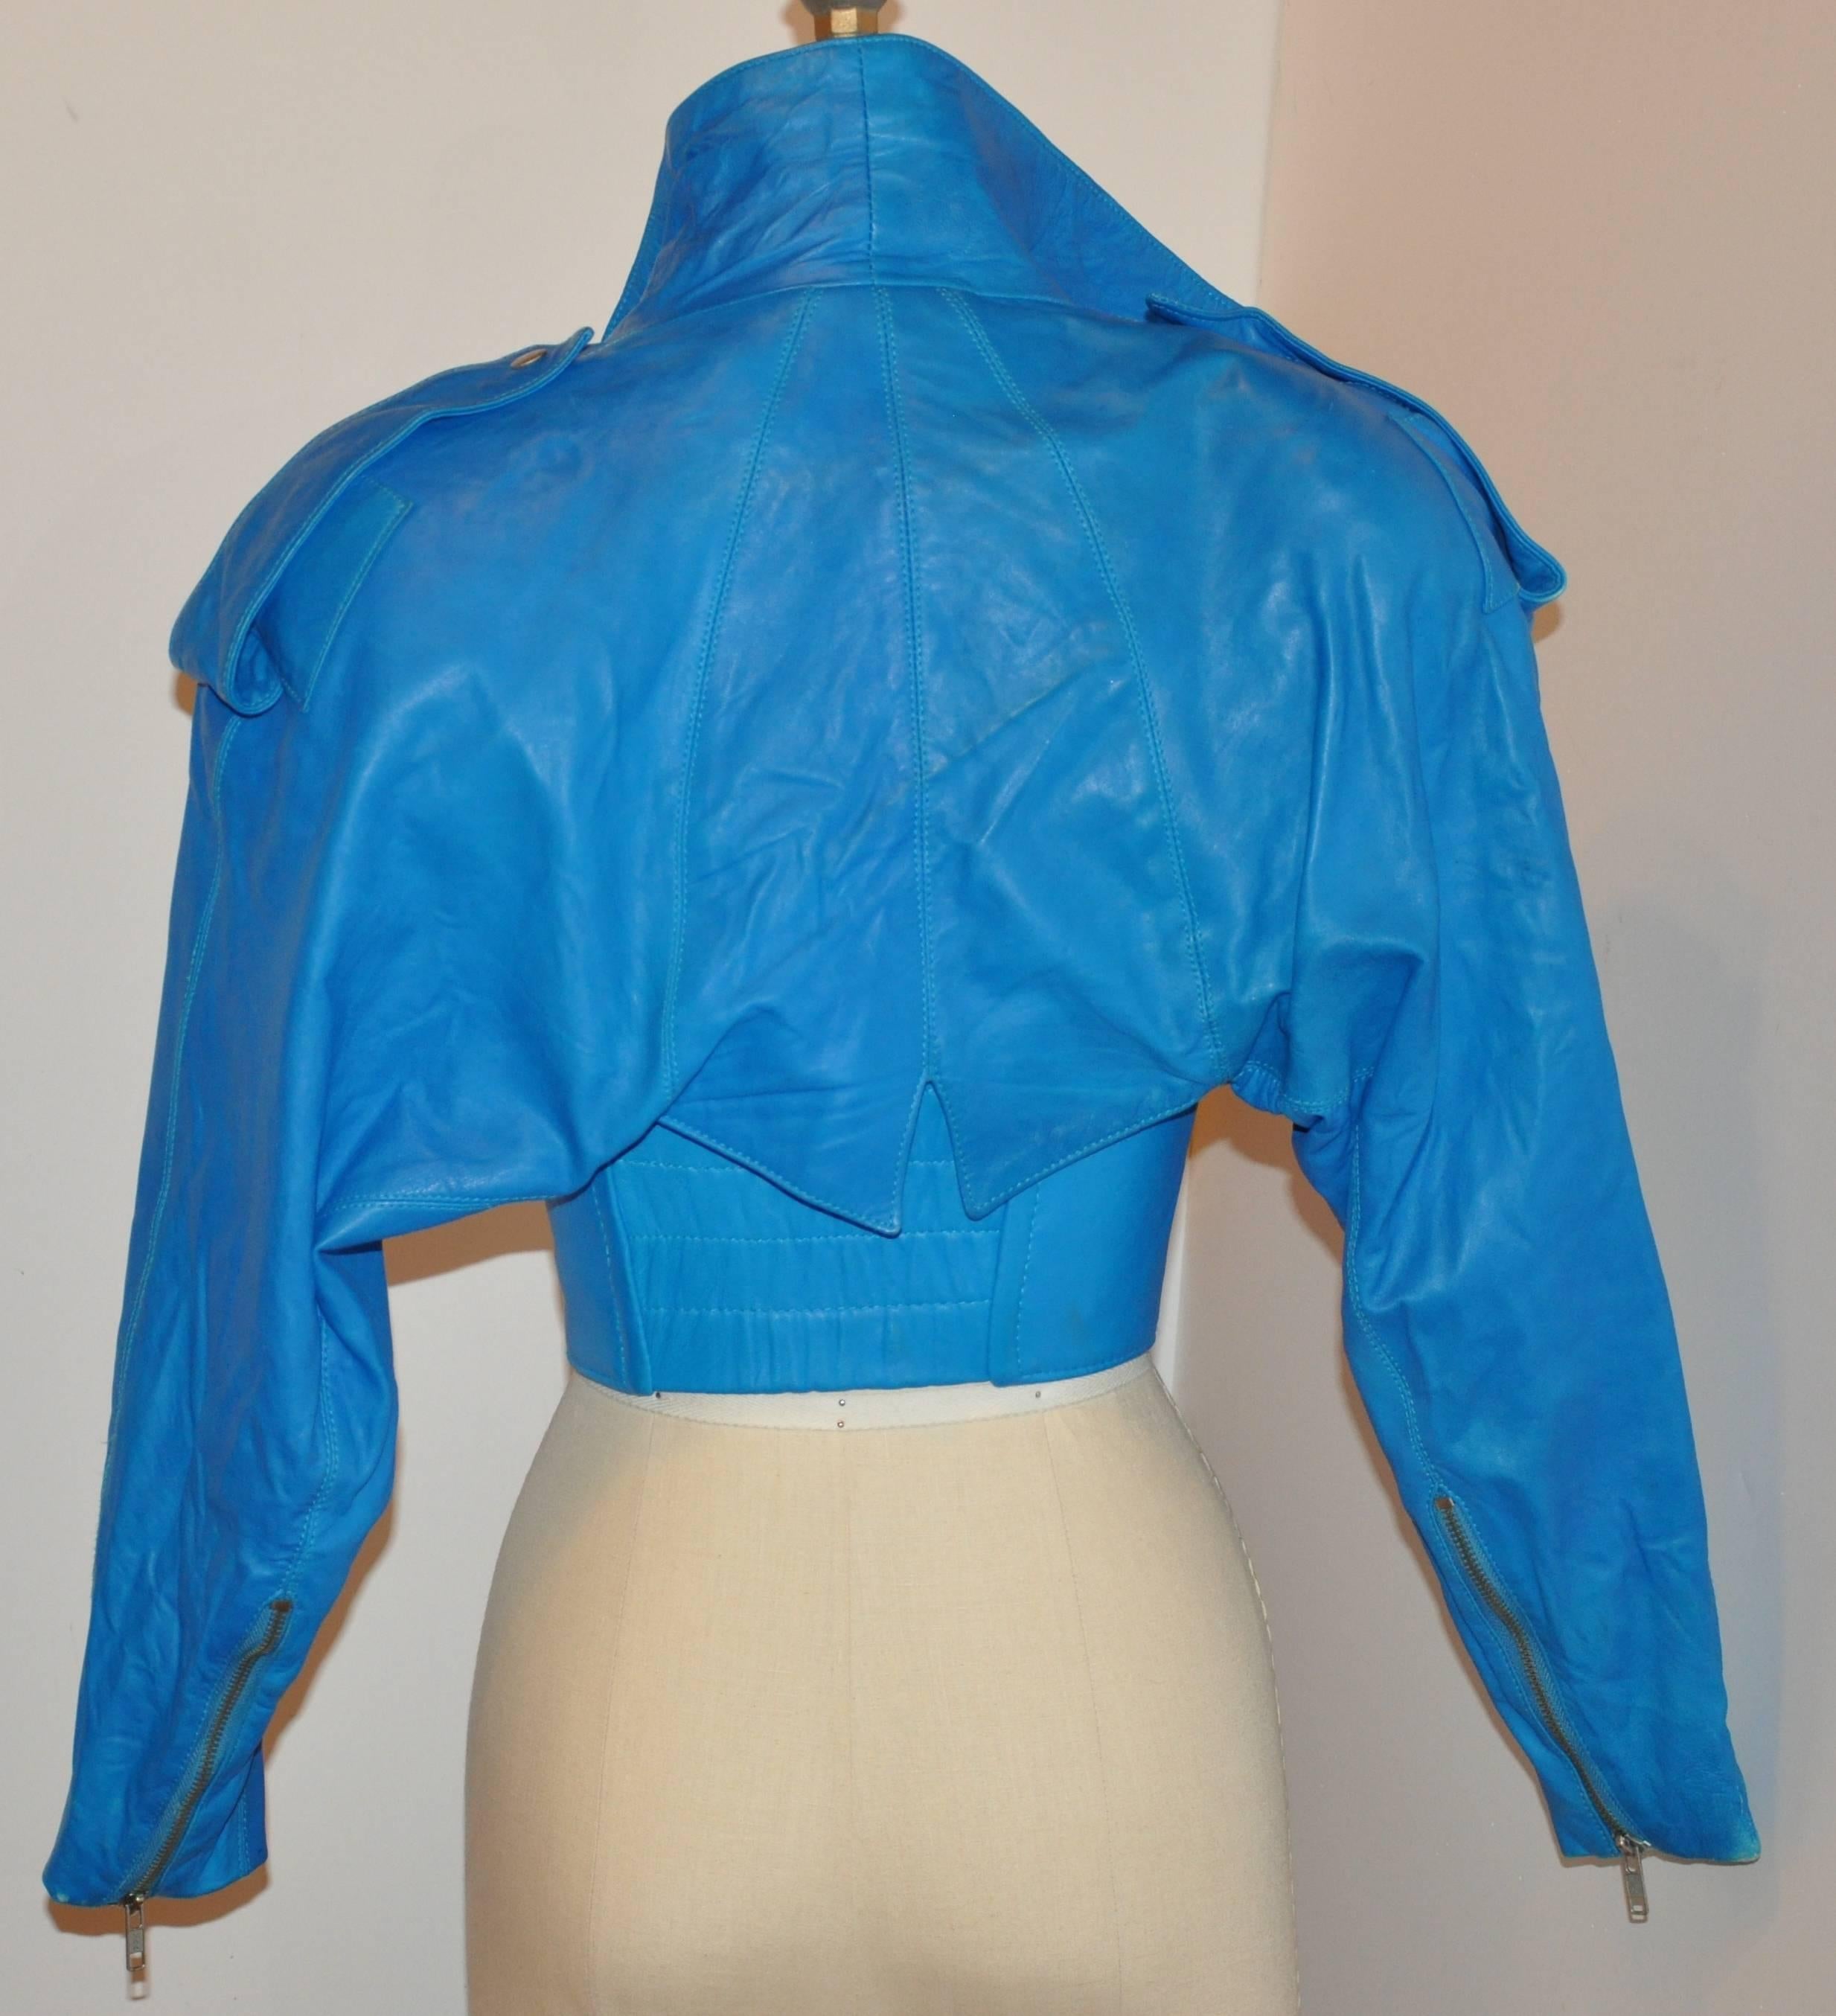           Michael Hoban for North Beach Leather wonderful 3-piece turquoise lambskin leather ensemble consists of a mini Motor-cycle style zipper jacket with two matching bustiers. The zipper jacket is size 3/4 with the hem circumference measuring